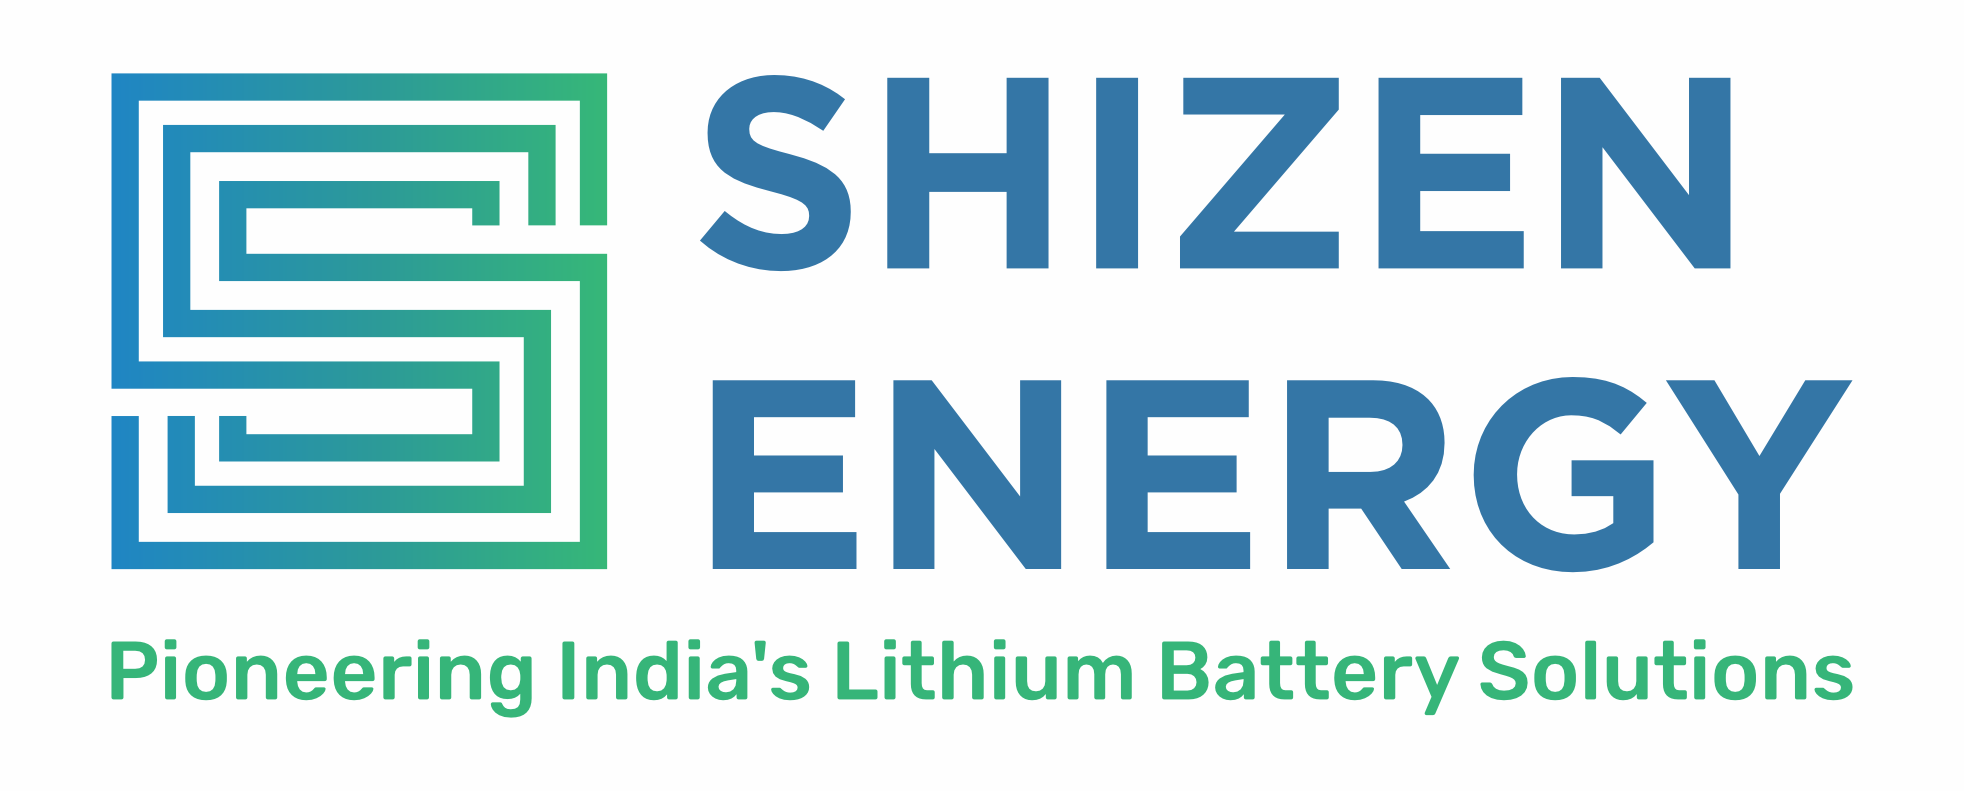 lithium battery solutions for shizen energy